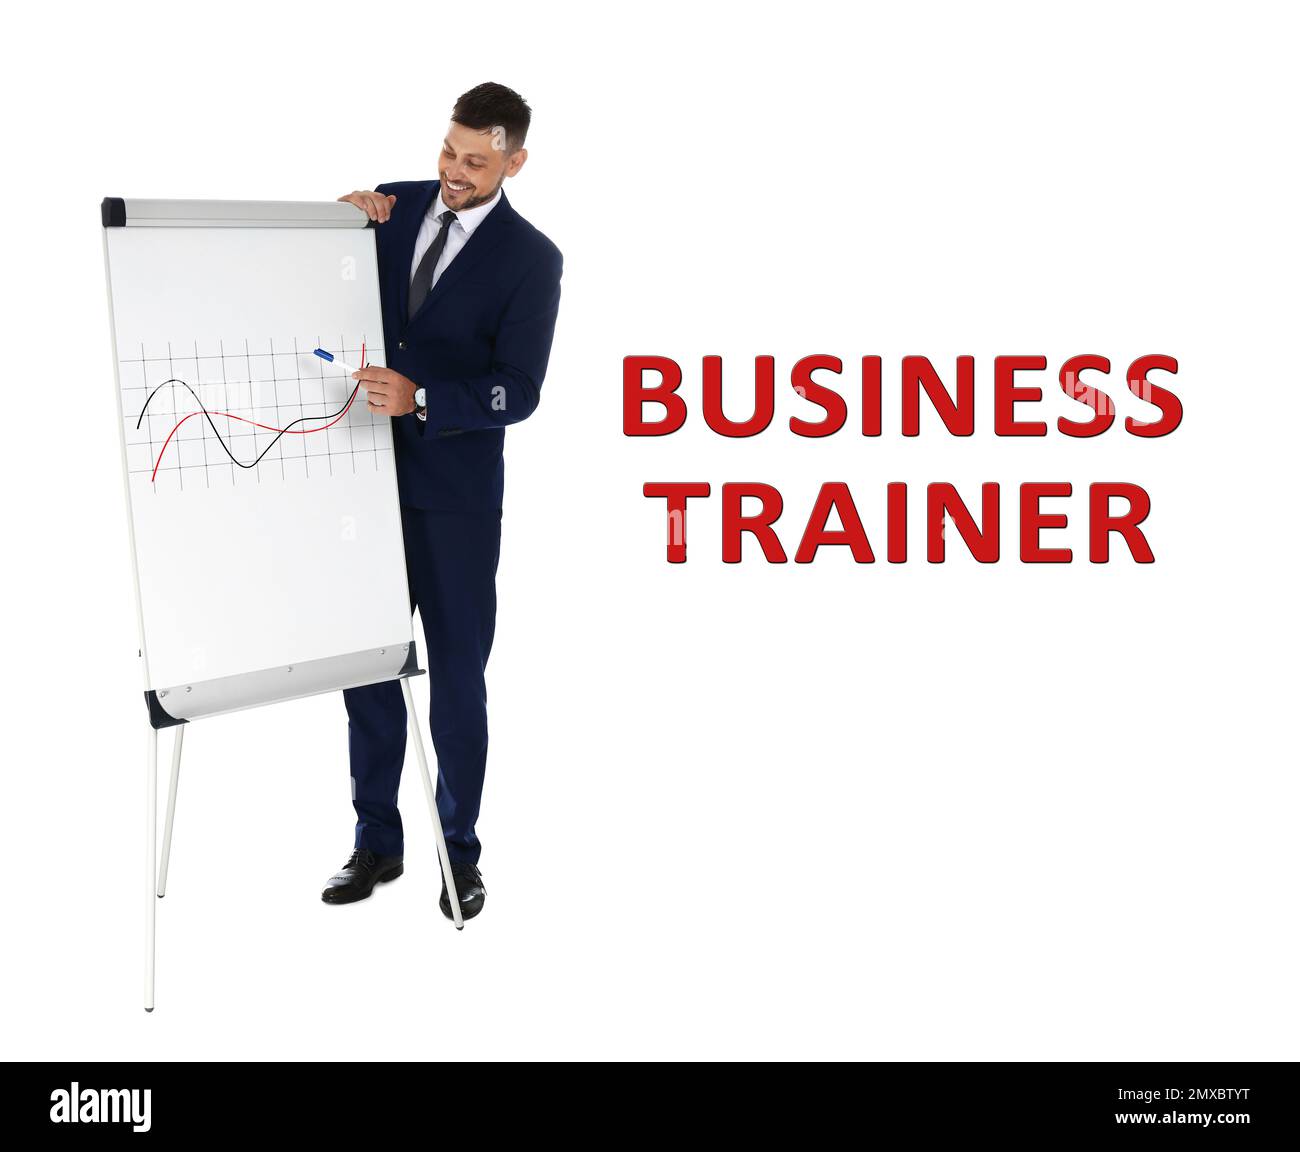 Professional business trainer giving presentation on white background Stock Photo